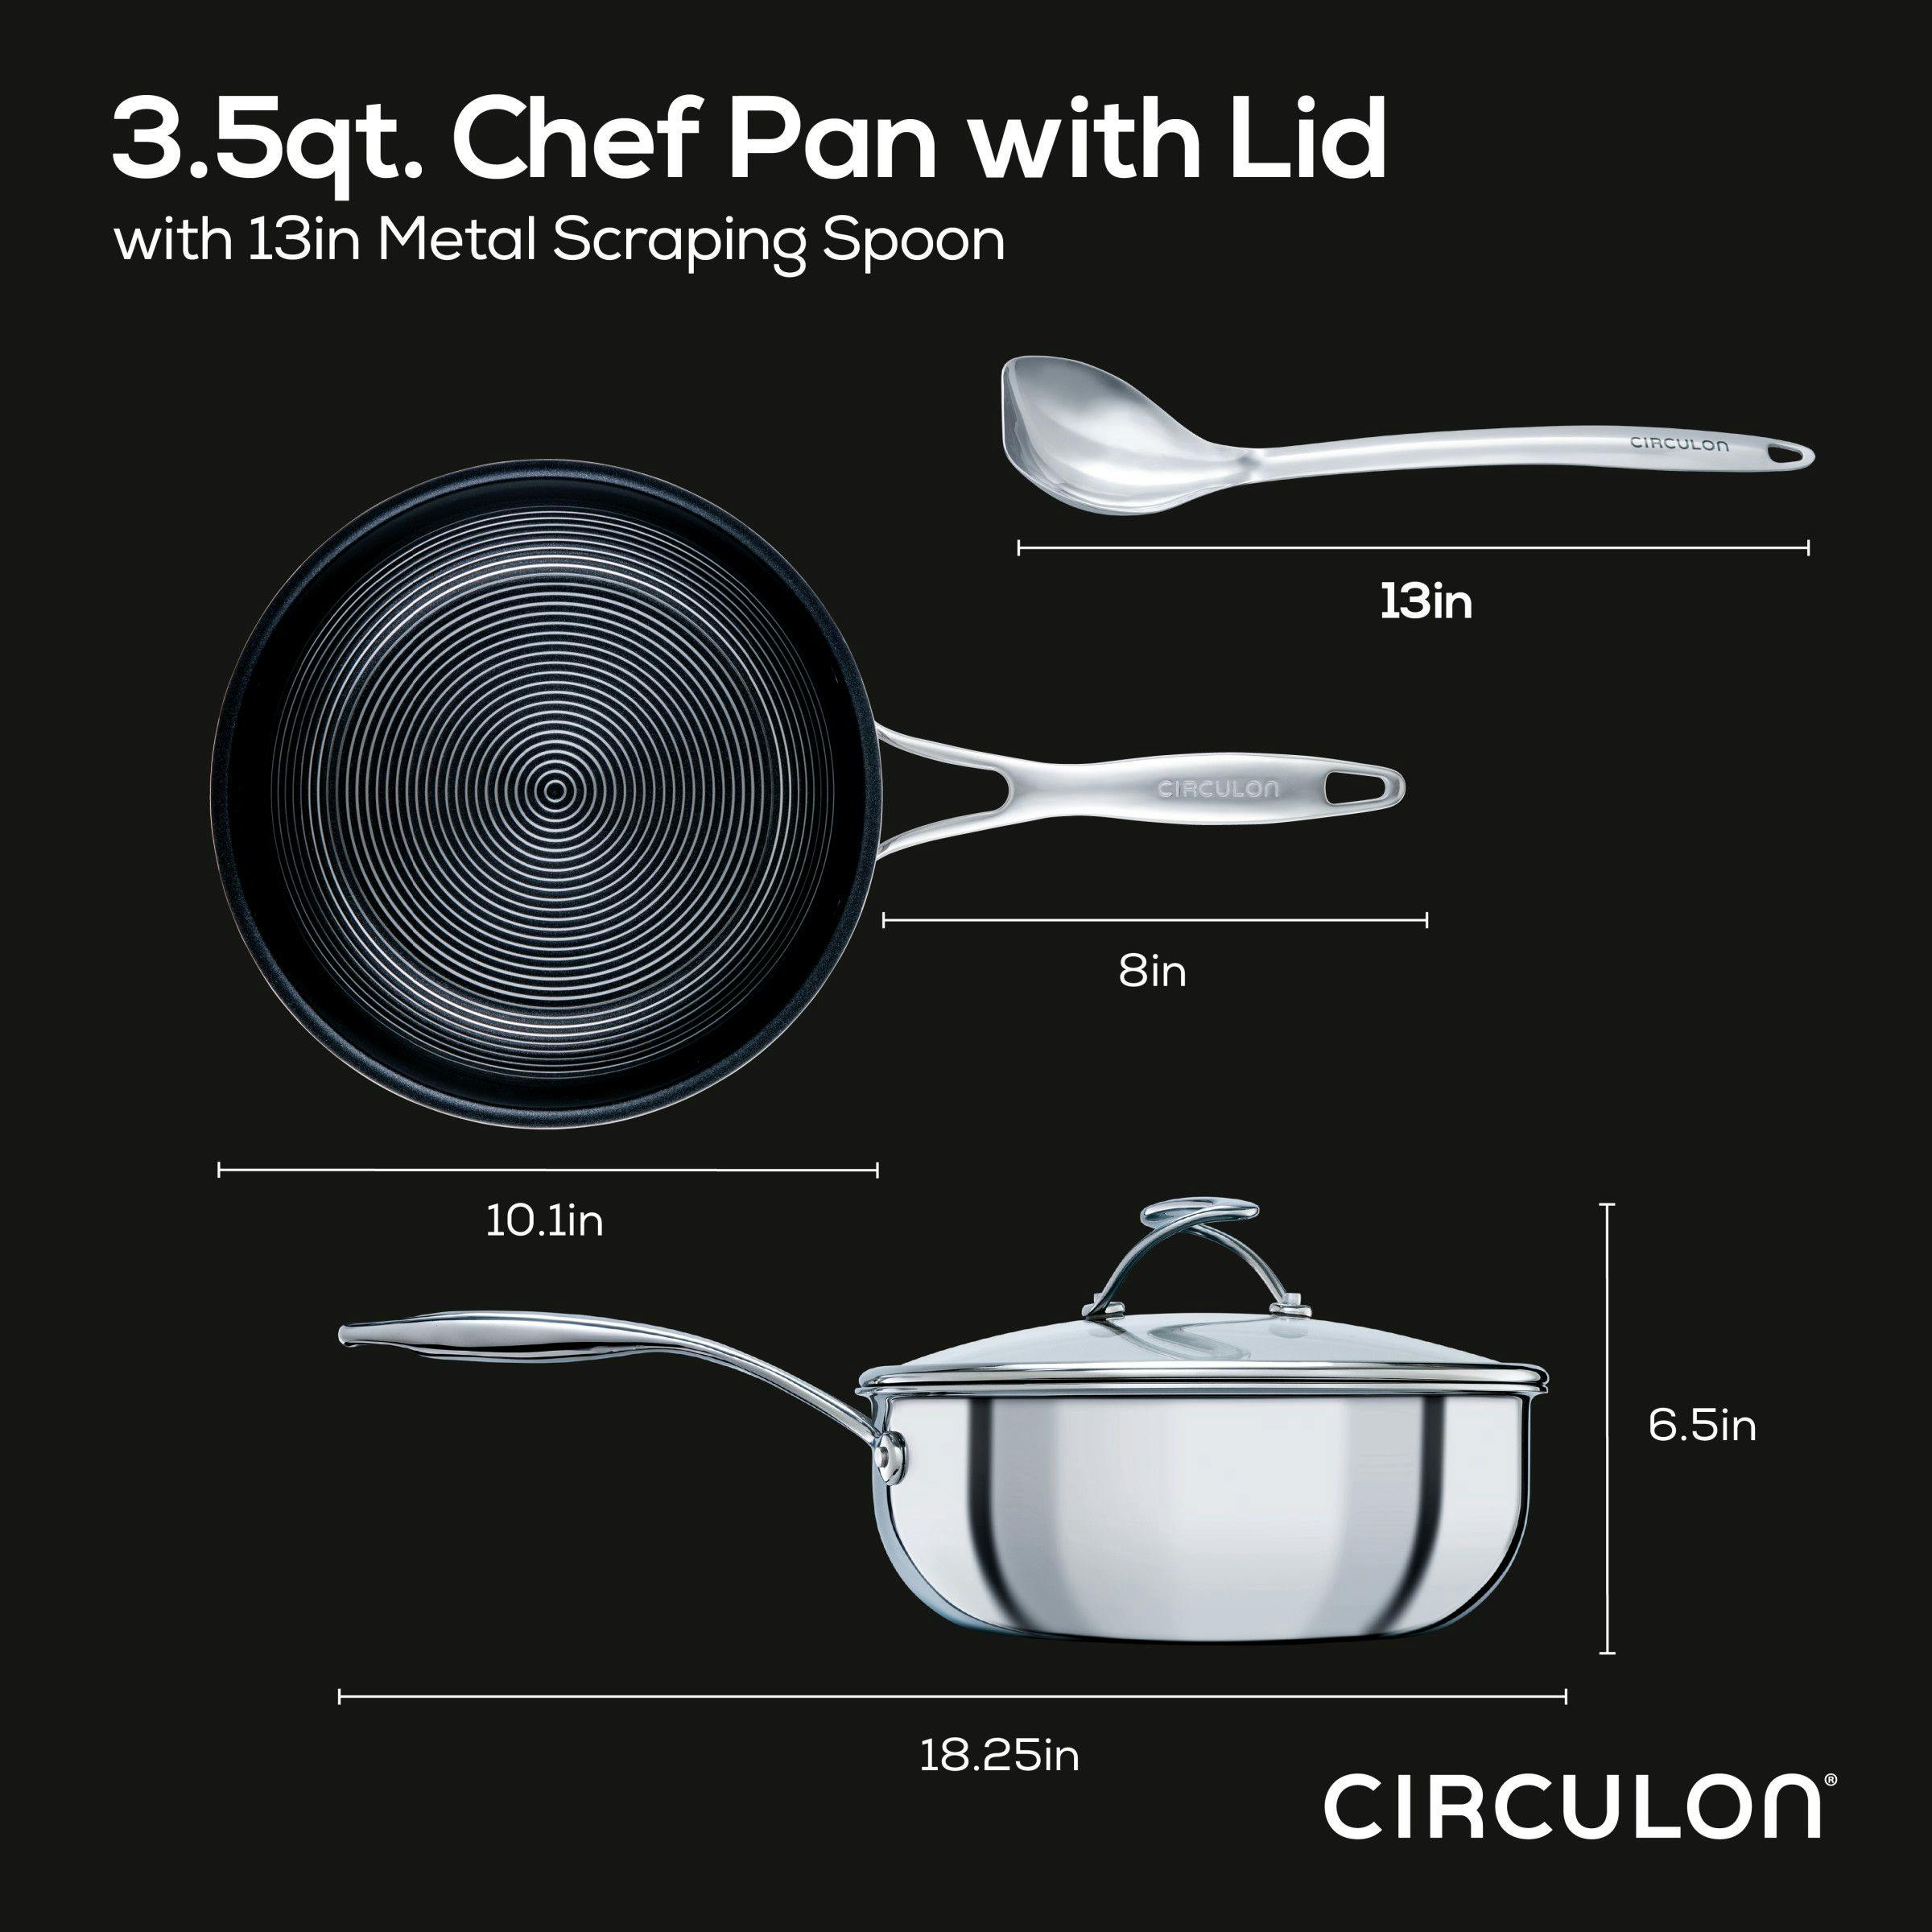 Circulon Clad Stainless Steel Induction Chef Pan and Utensil Set with Hybrid SteelShield and Nonstick Technology, 3-Piece, Silver